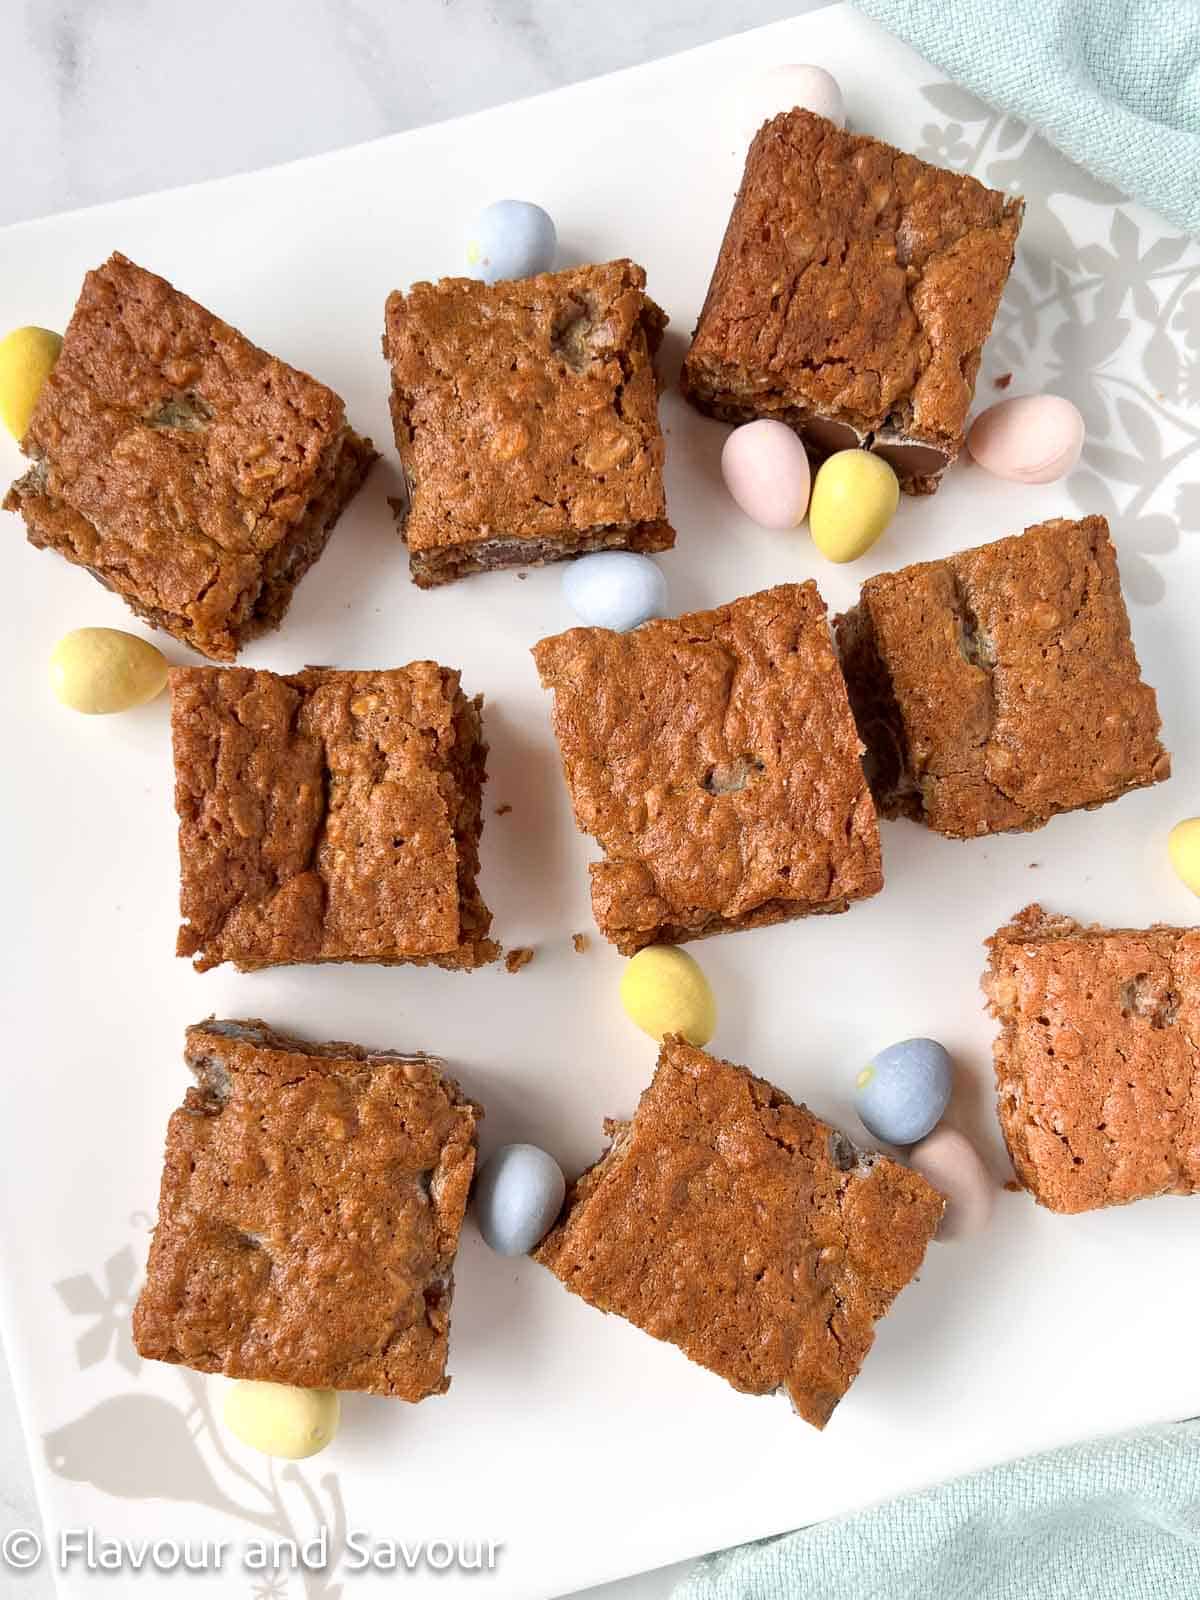 Mini egg oatmeal cookie bars cut into squares on a plate with mini eggs.